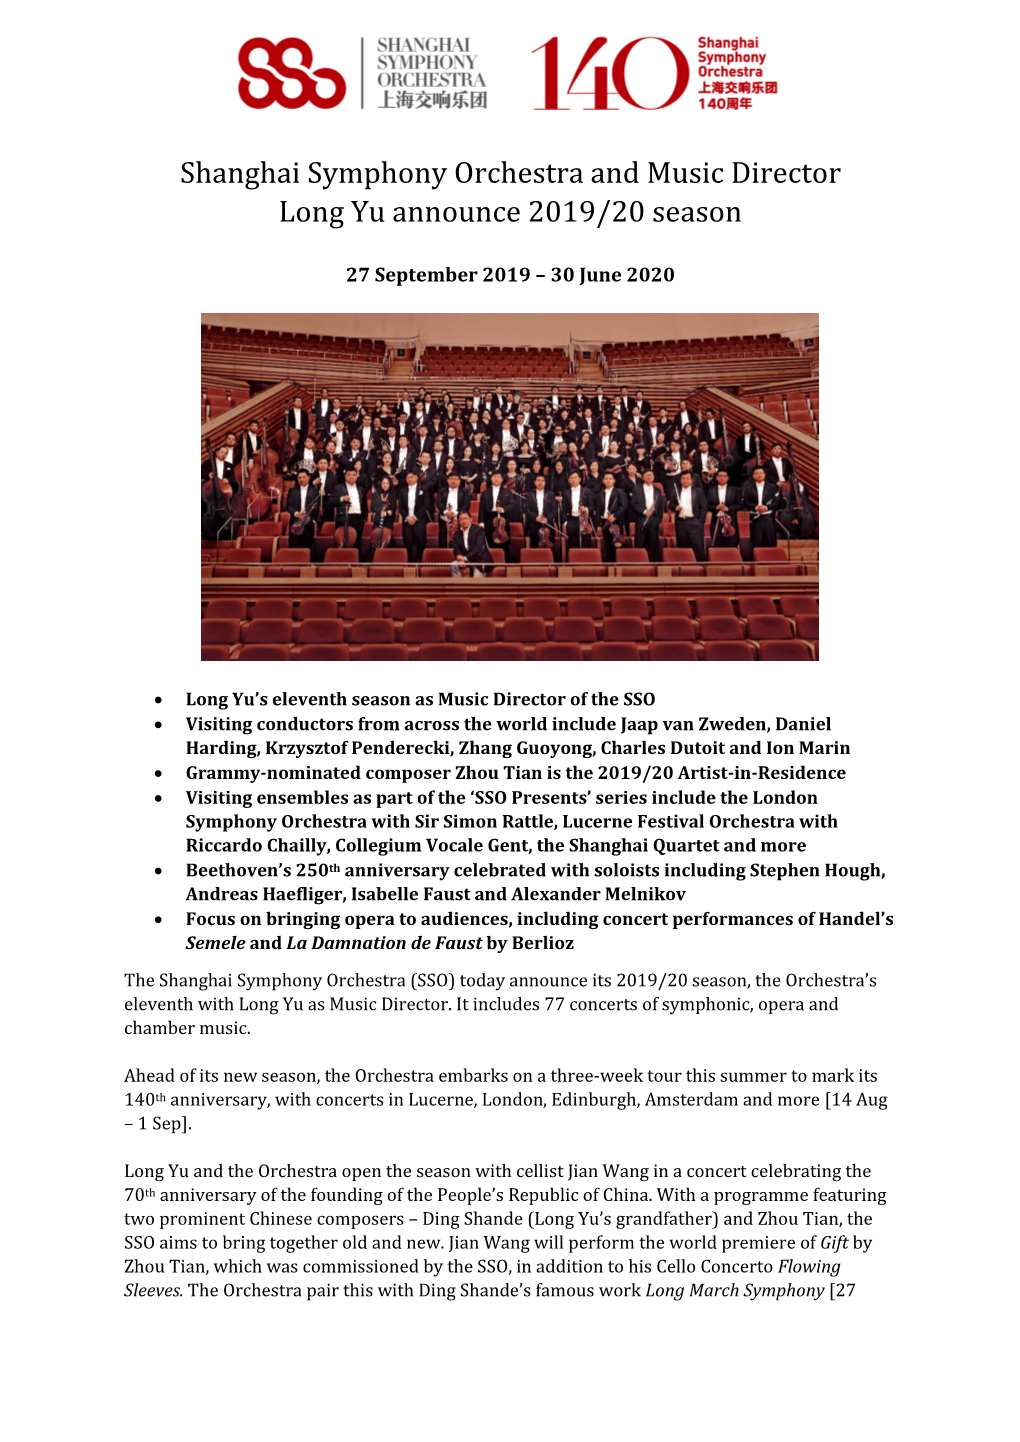 Shanghai Symphony Orchestra and Music Director Long Yu Announce 2019/20 Season